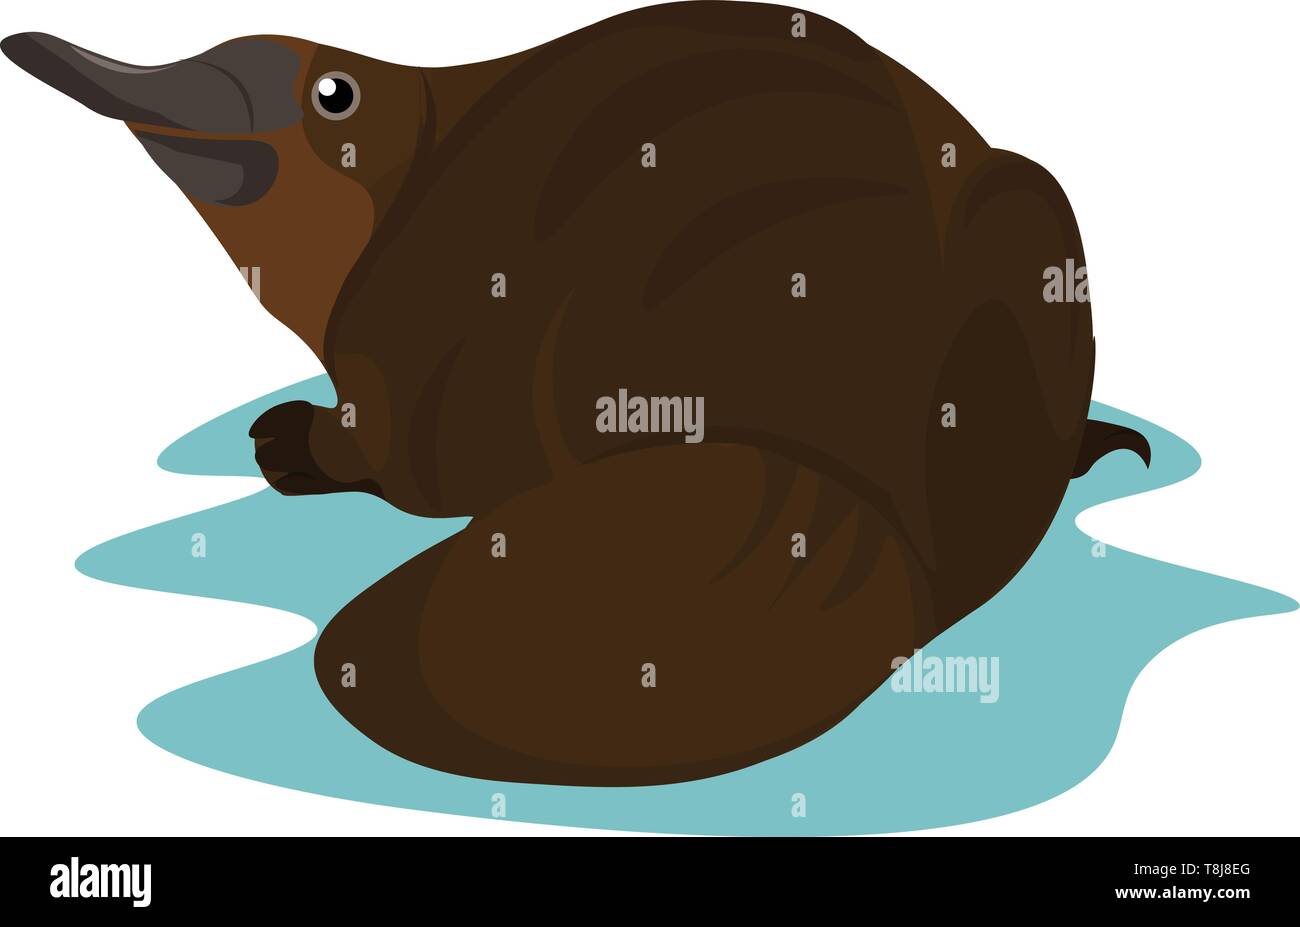 A brown platypus with an elongated bill, short tail, webbed feet, and dense fur, keenly looks to the left while lying on the water over white backgrou Stock Vector